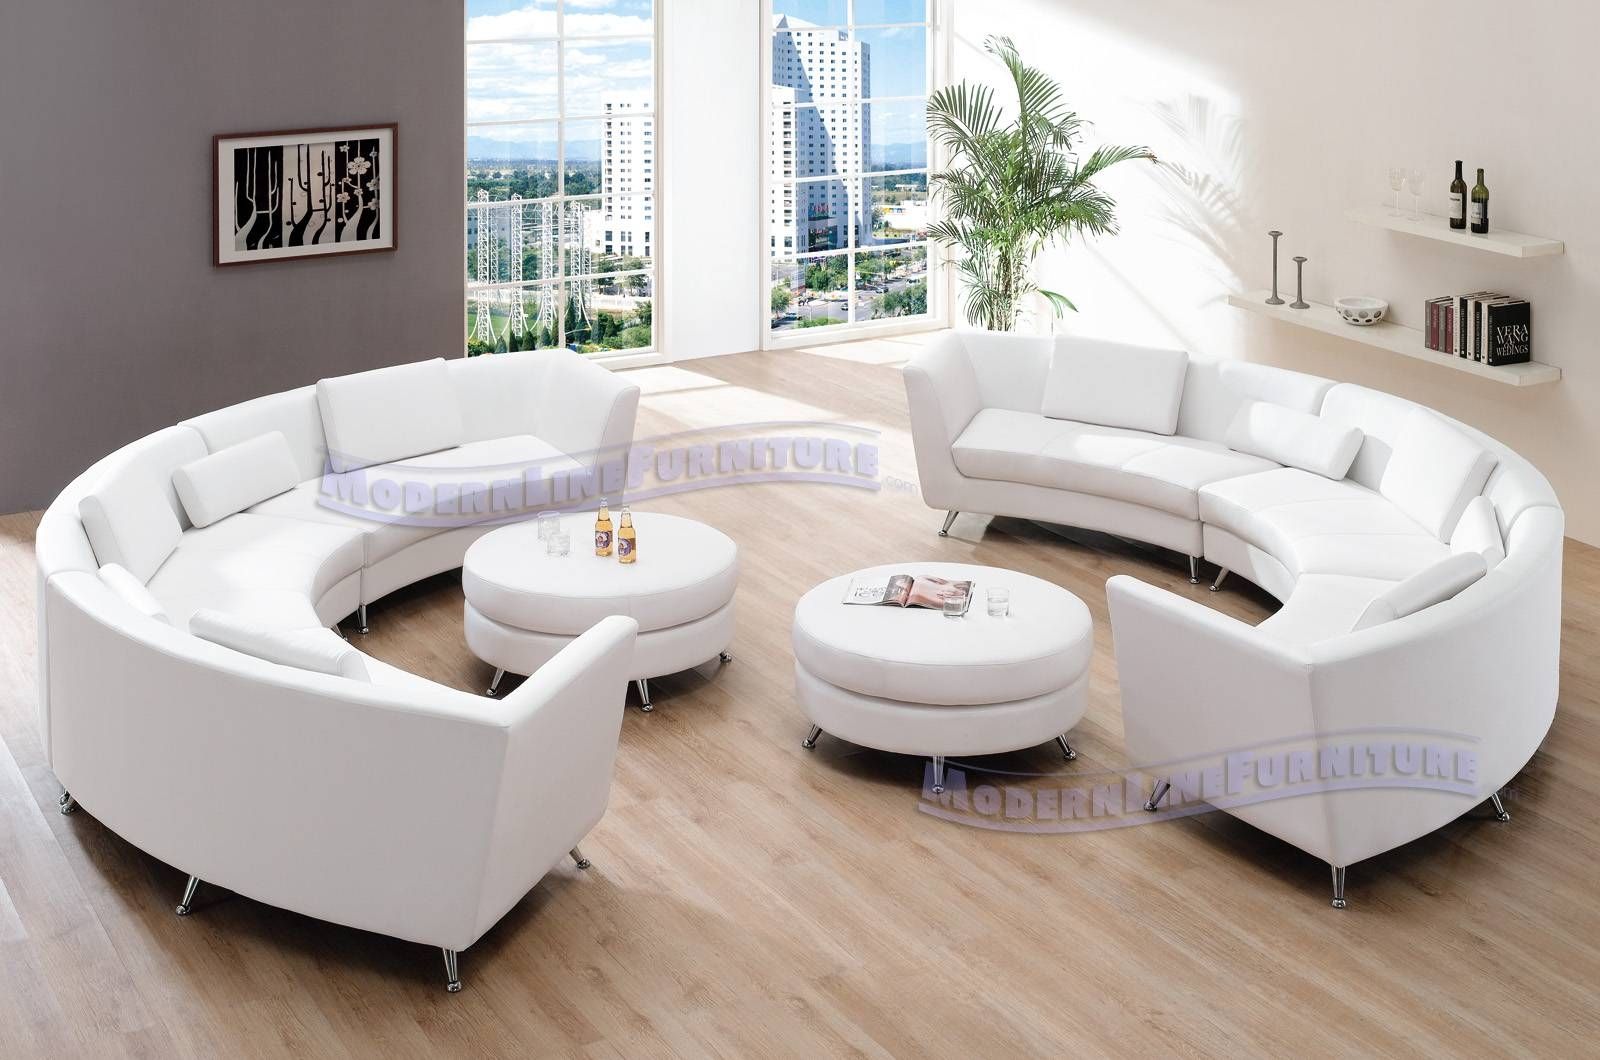 C Shaped Sofa Sectional – Cleanupflorida For C Shaped Sectional Sofa (View 9 of 30)